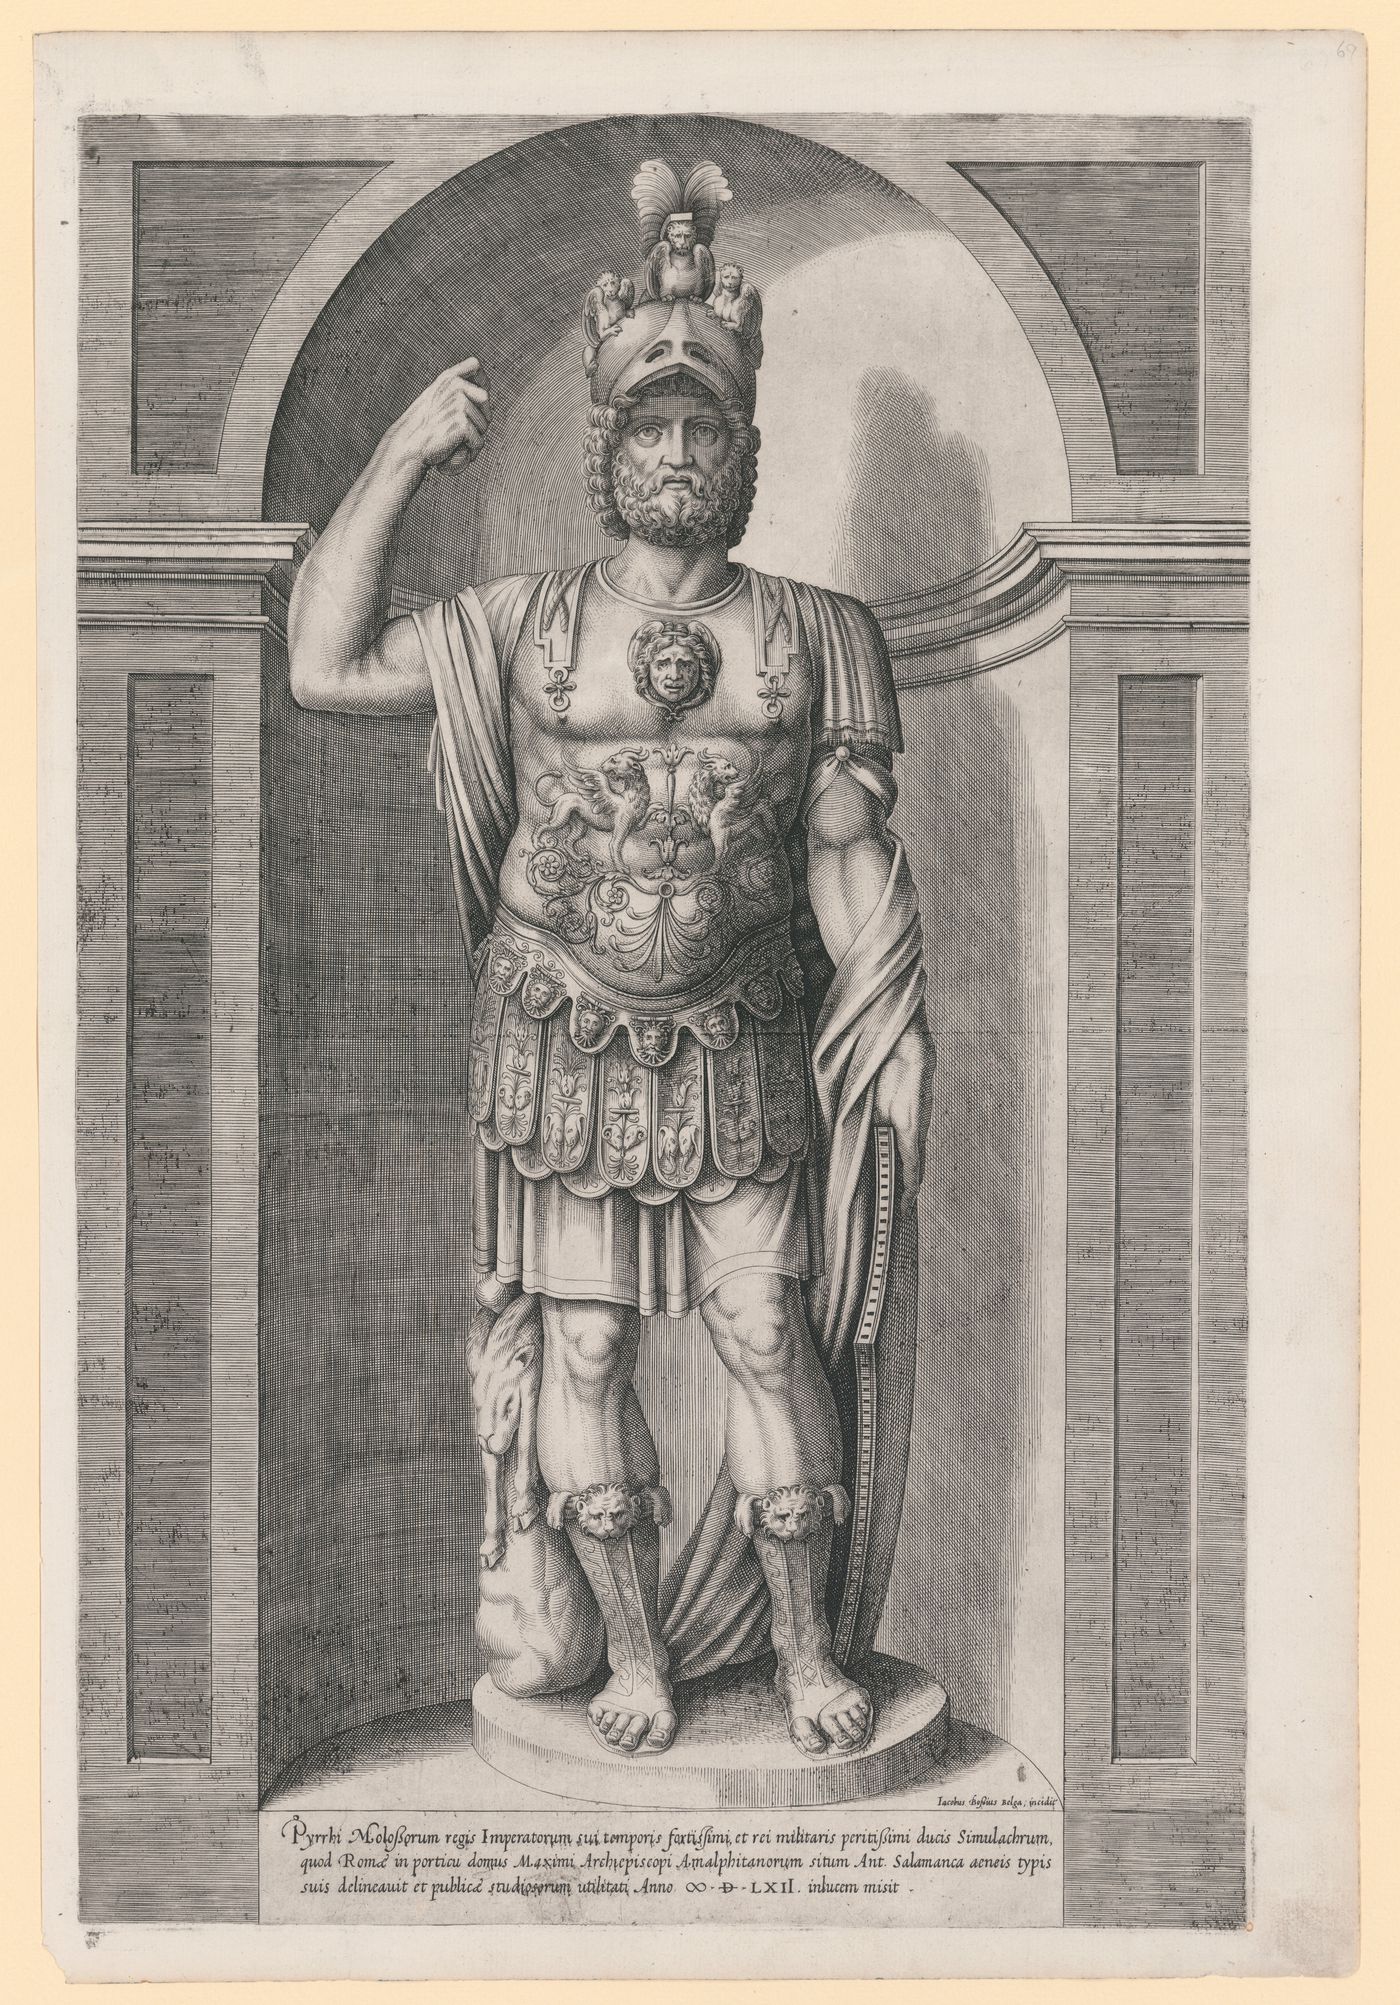 Perspective of a statue of Mars, also known as King Pyrrhus, in a niche